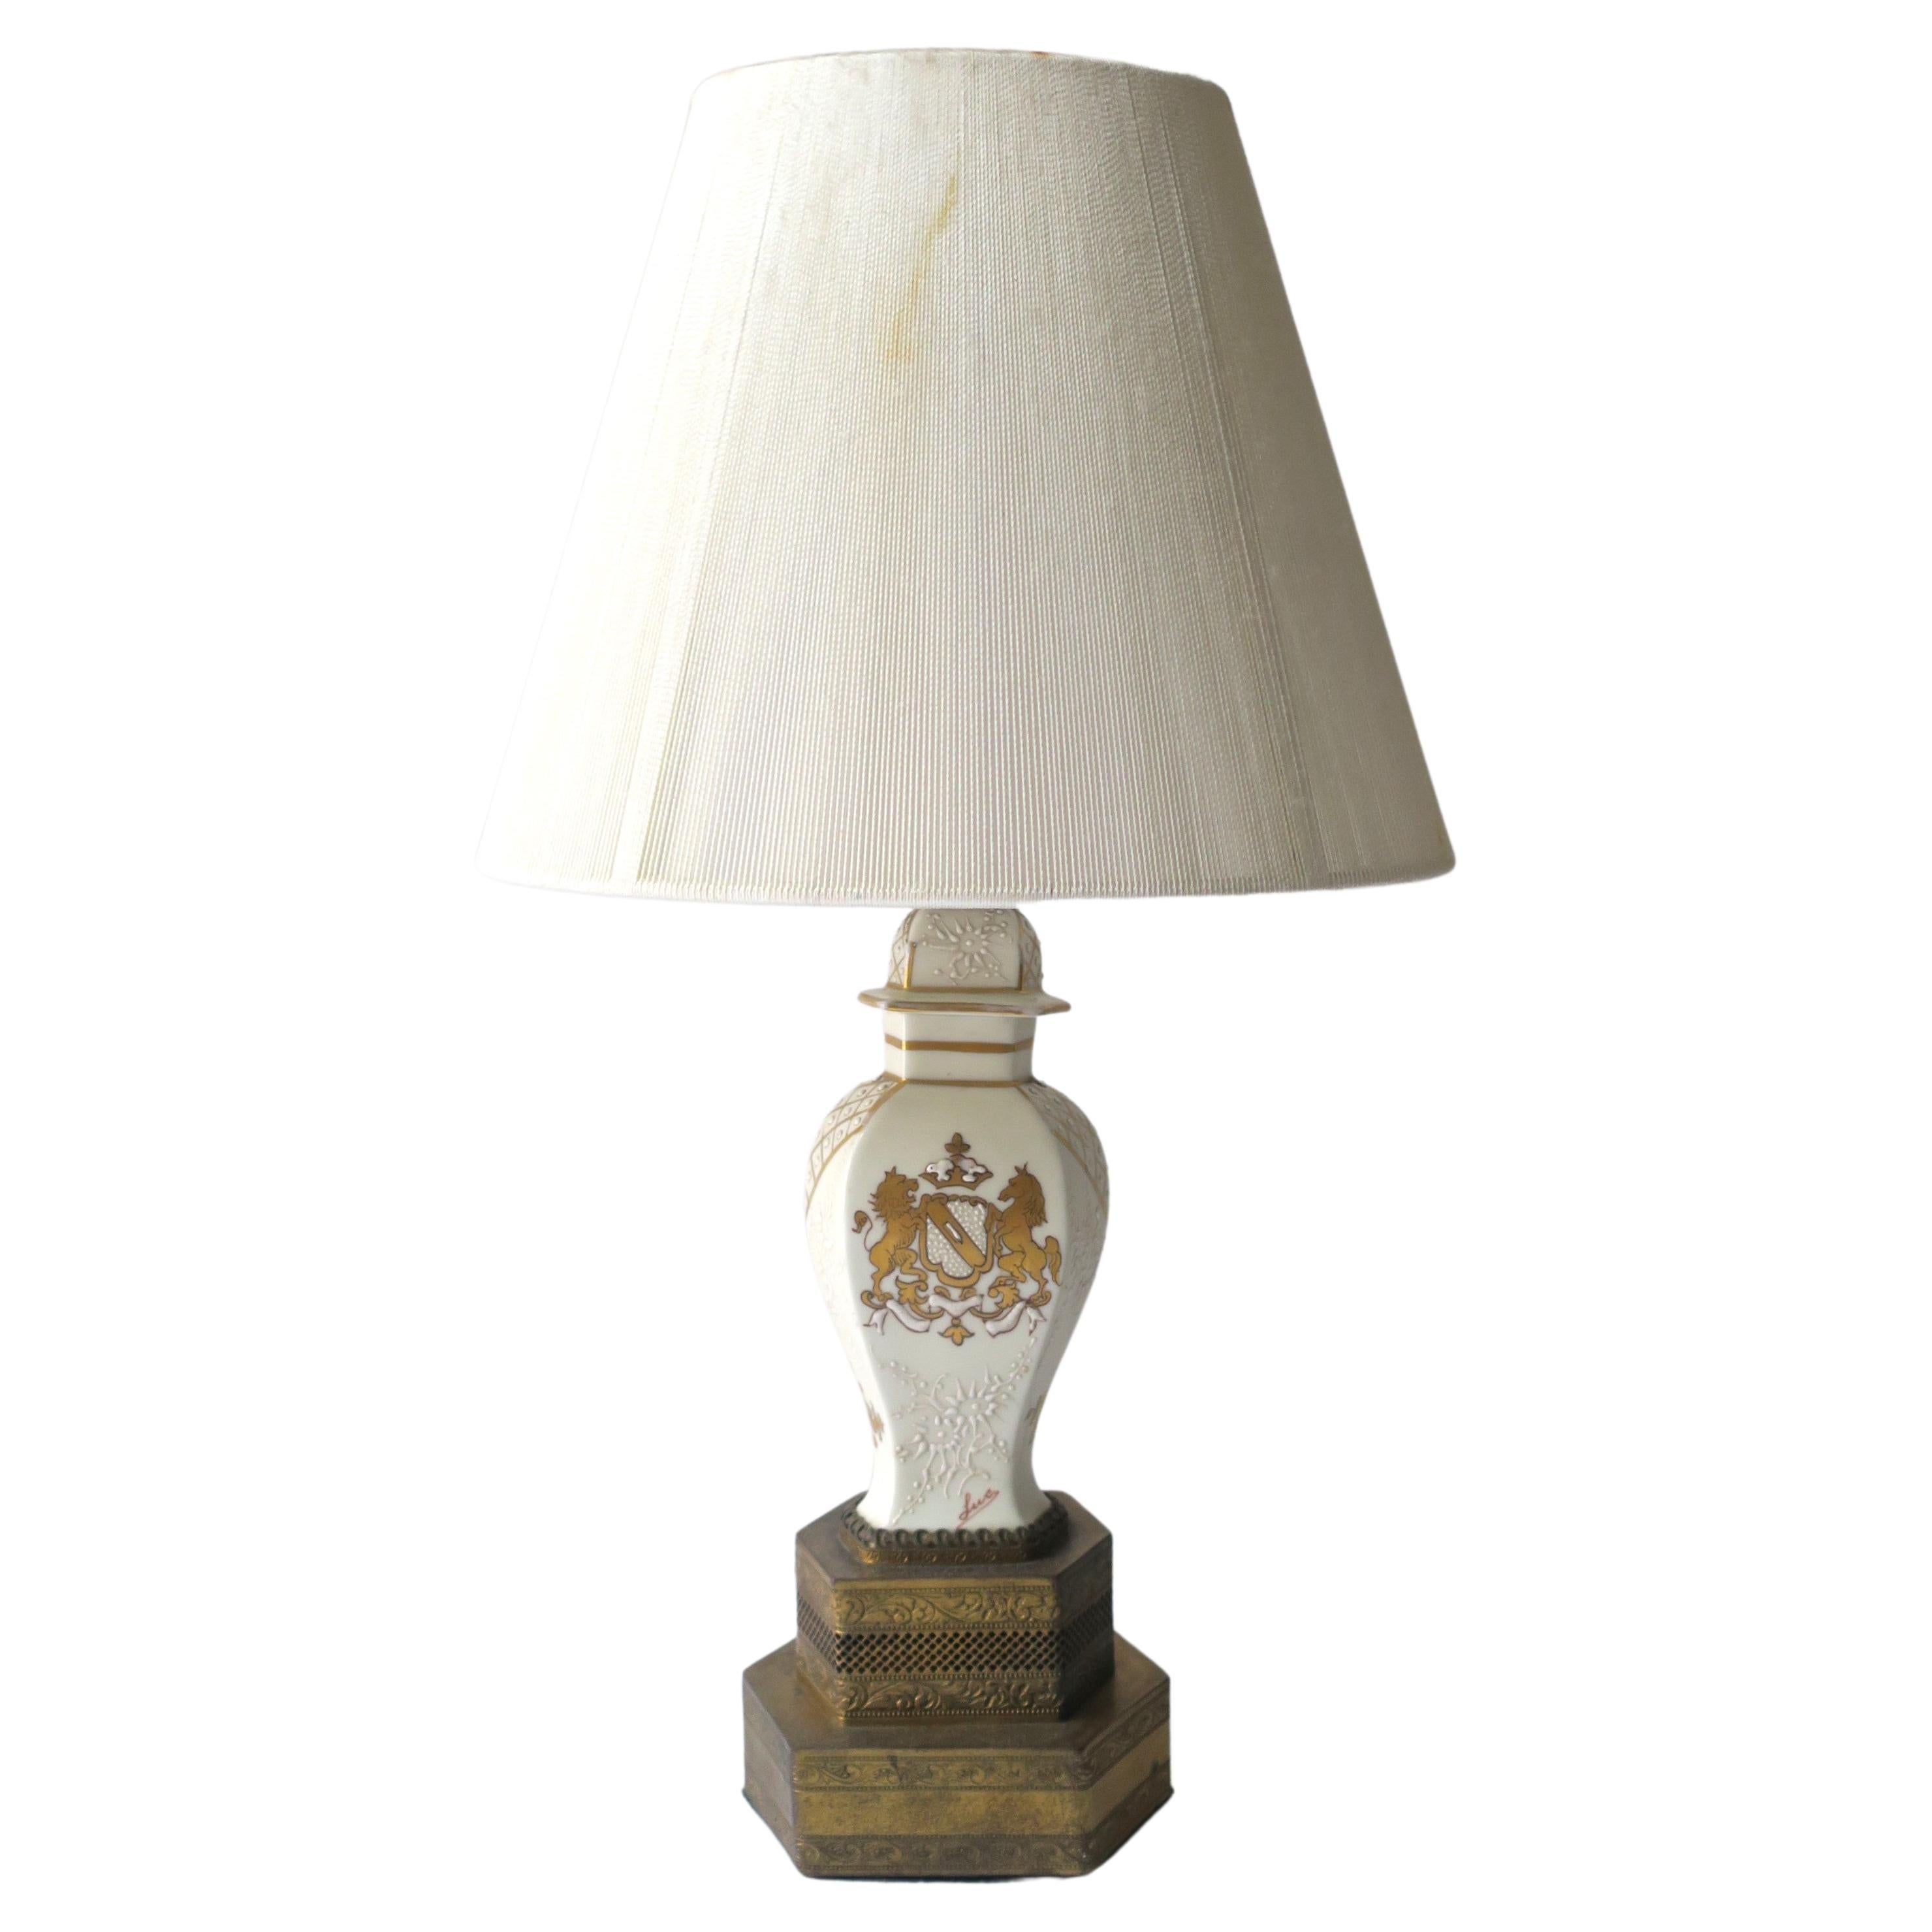 French Porcelain and Brass Table Lamp with Gold Lion Horse Design, Small